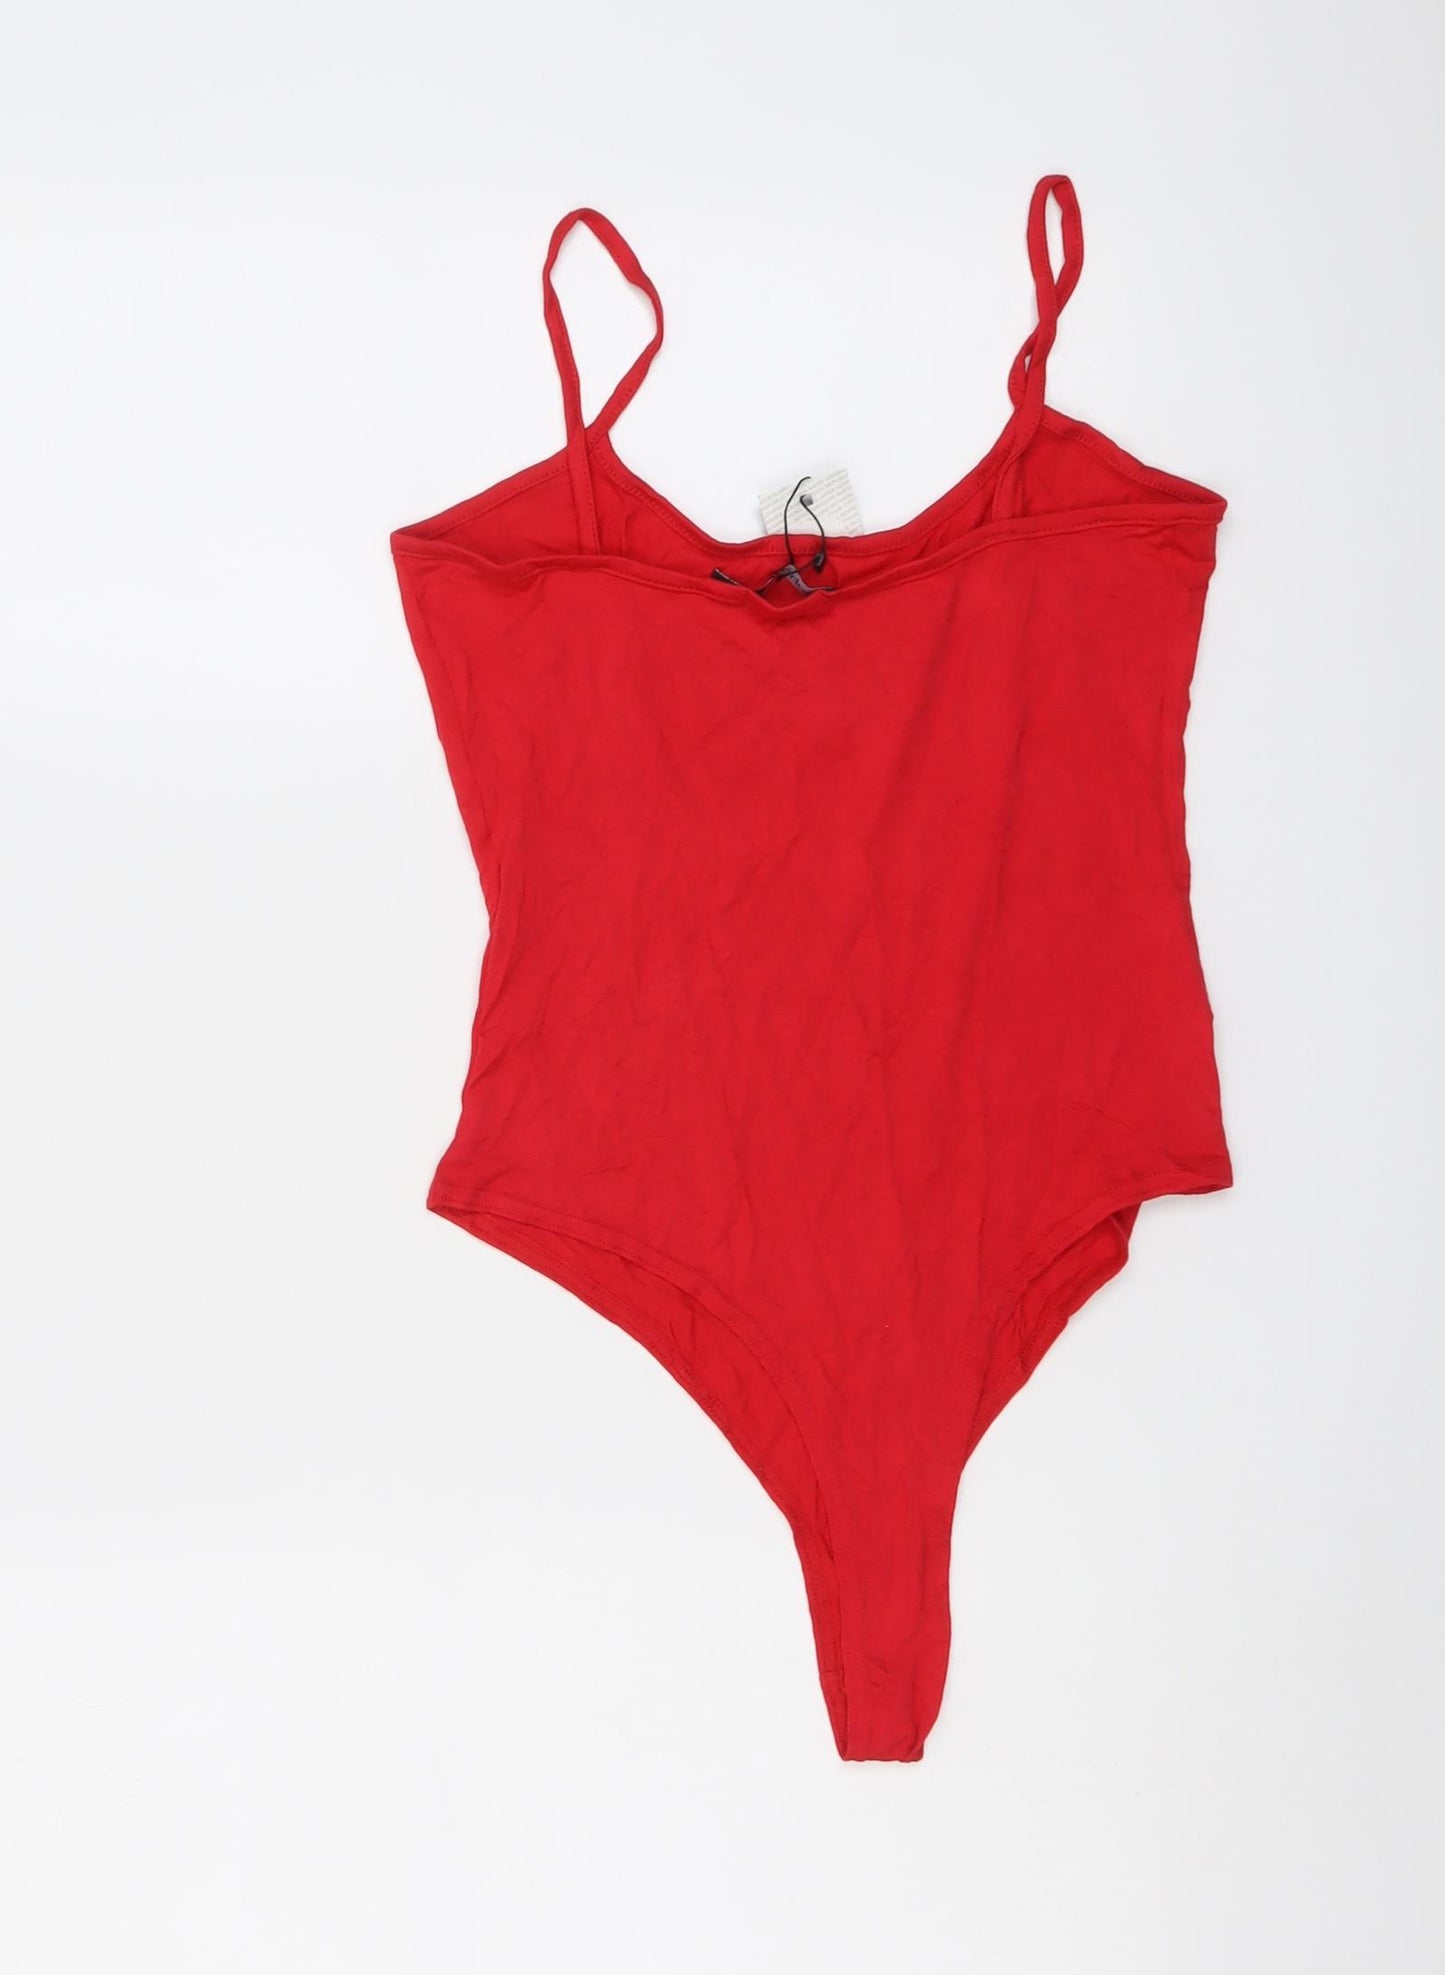 Boohoo Womens Red Viscose Bodysuit One-Piece Size 12 Snap